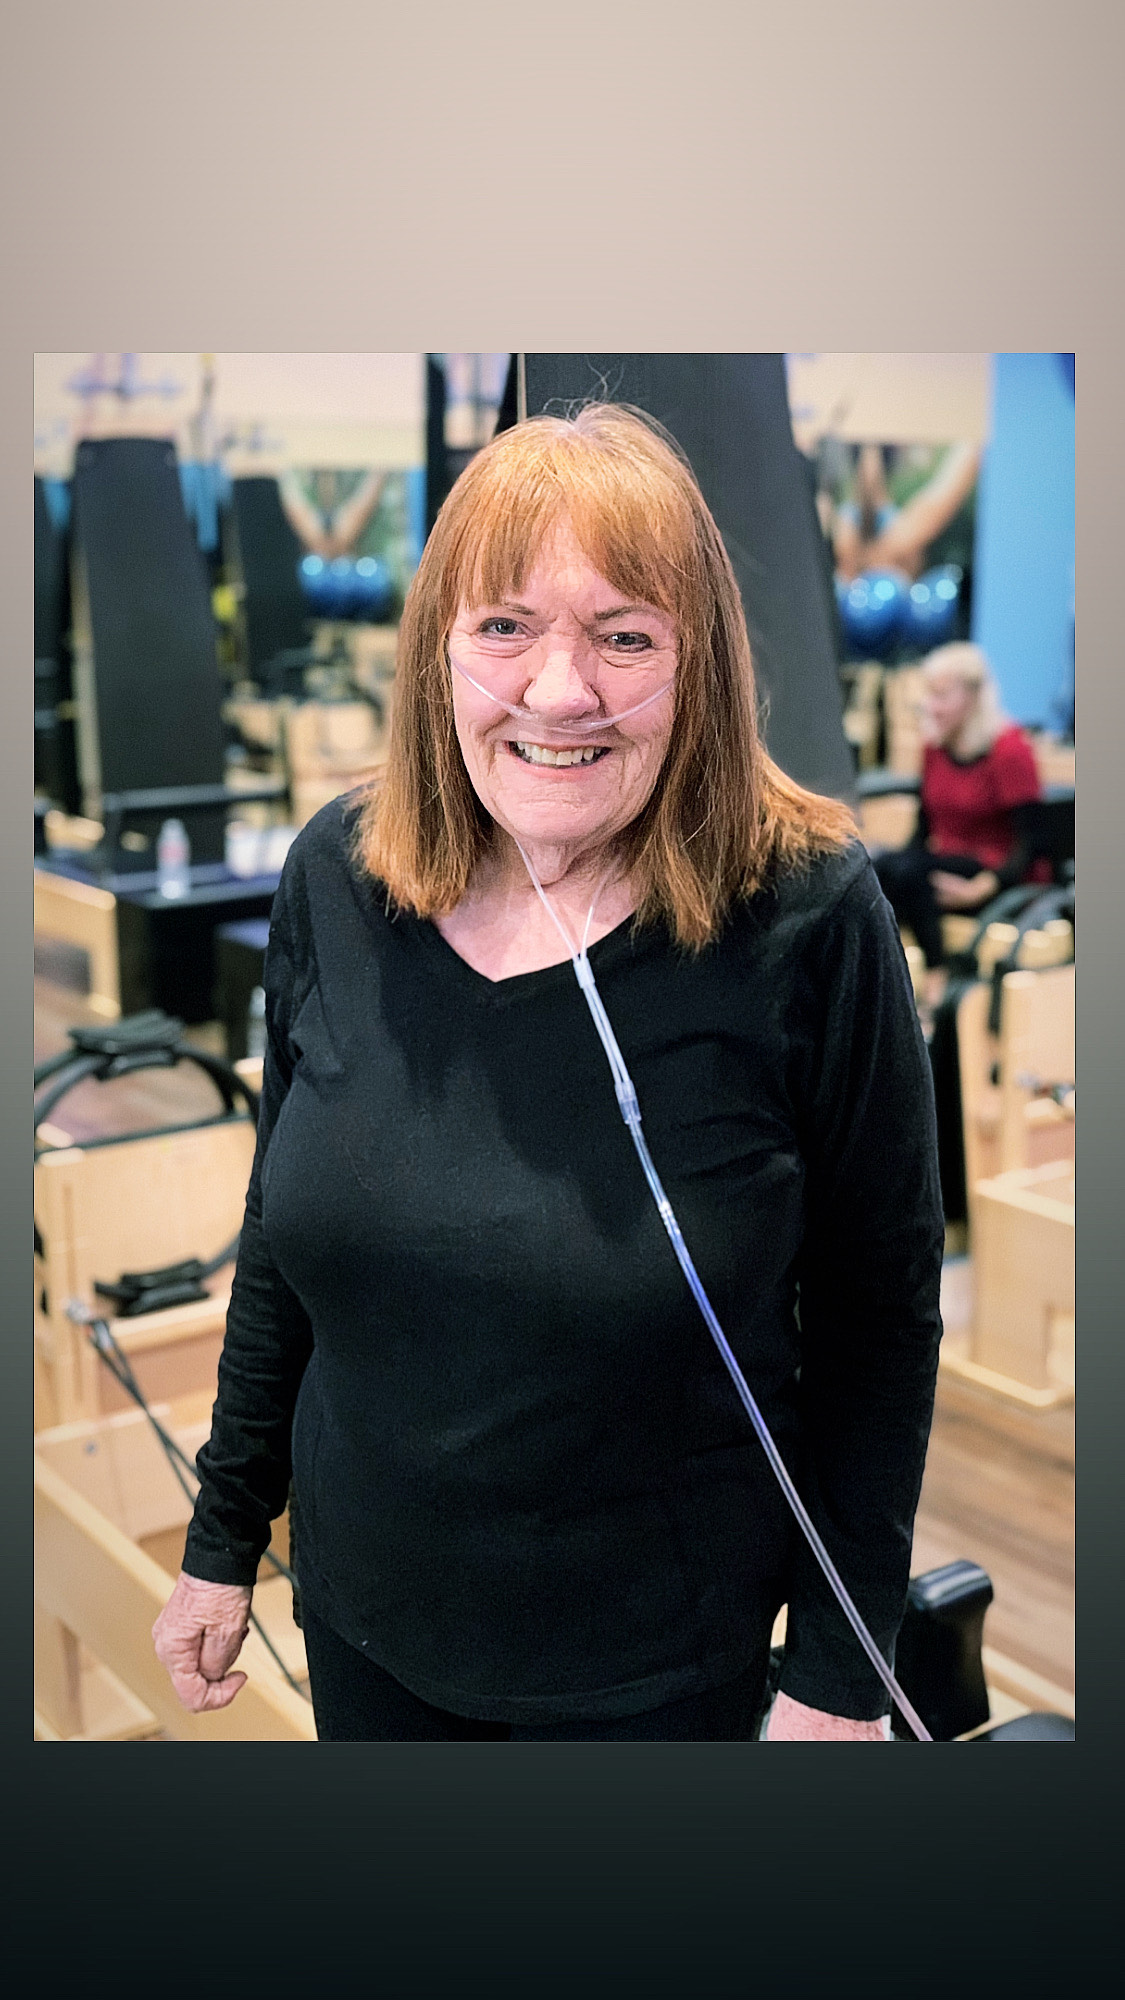 Lifelong Smoker Finds Strength in Pilates at 72